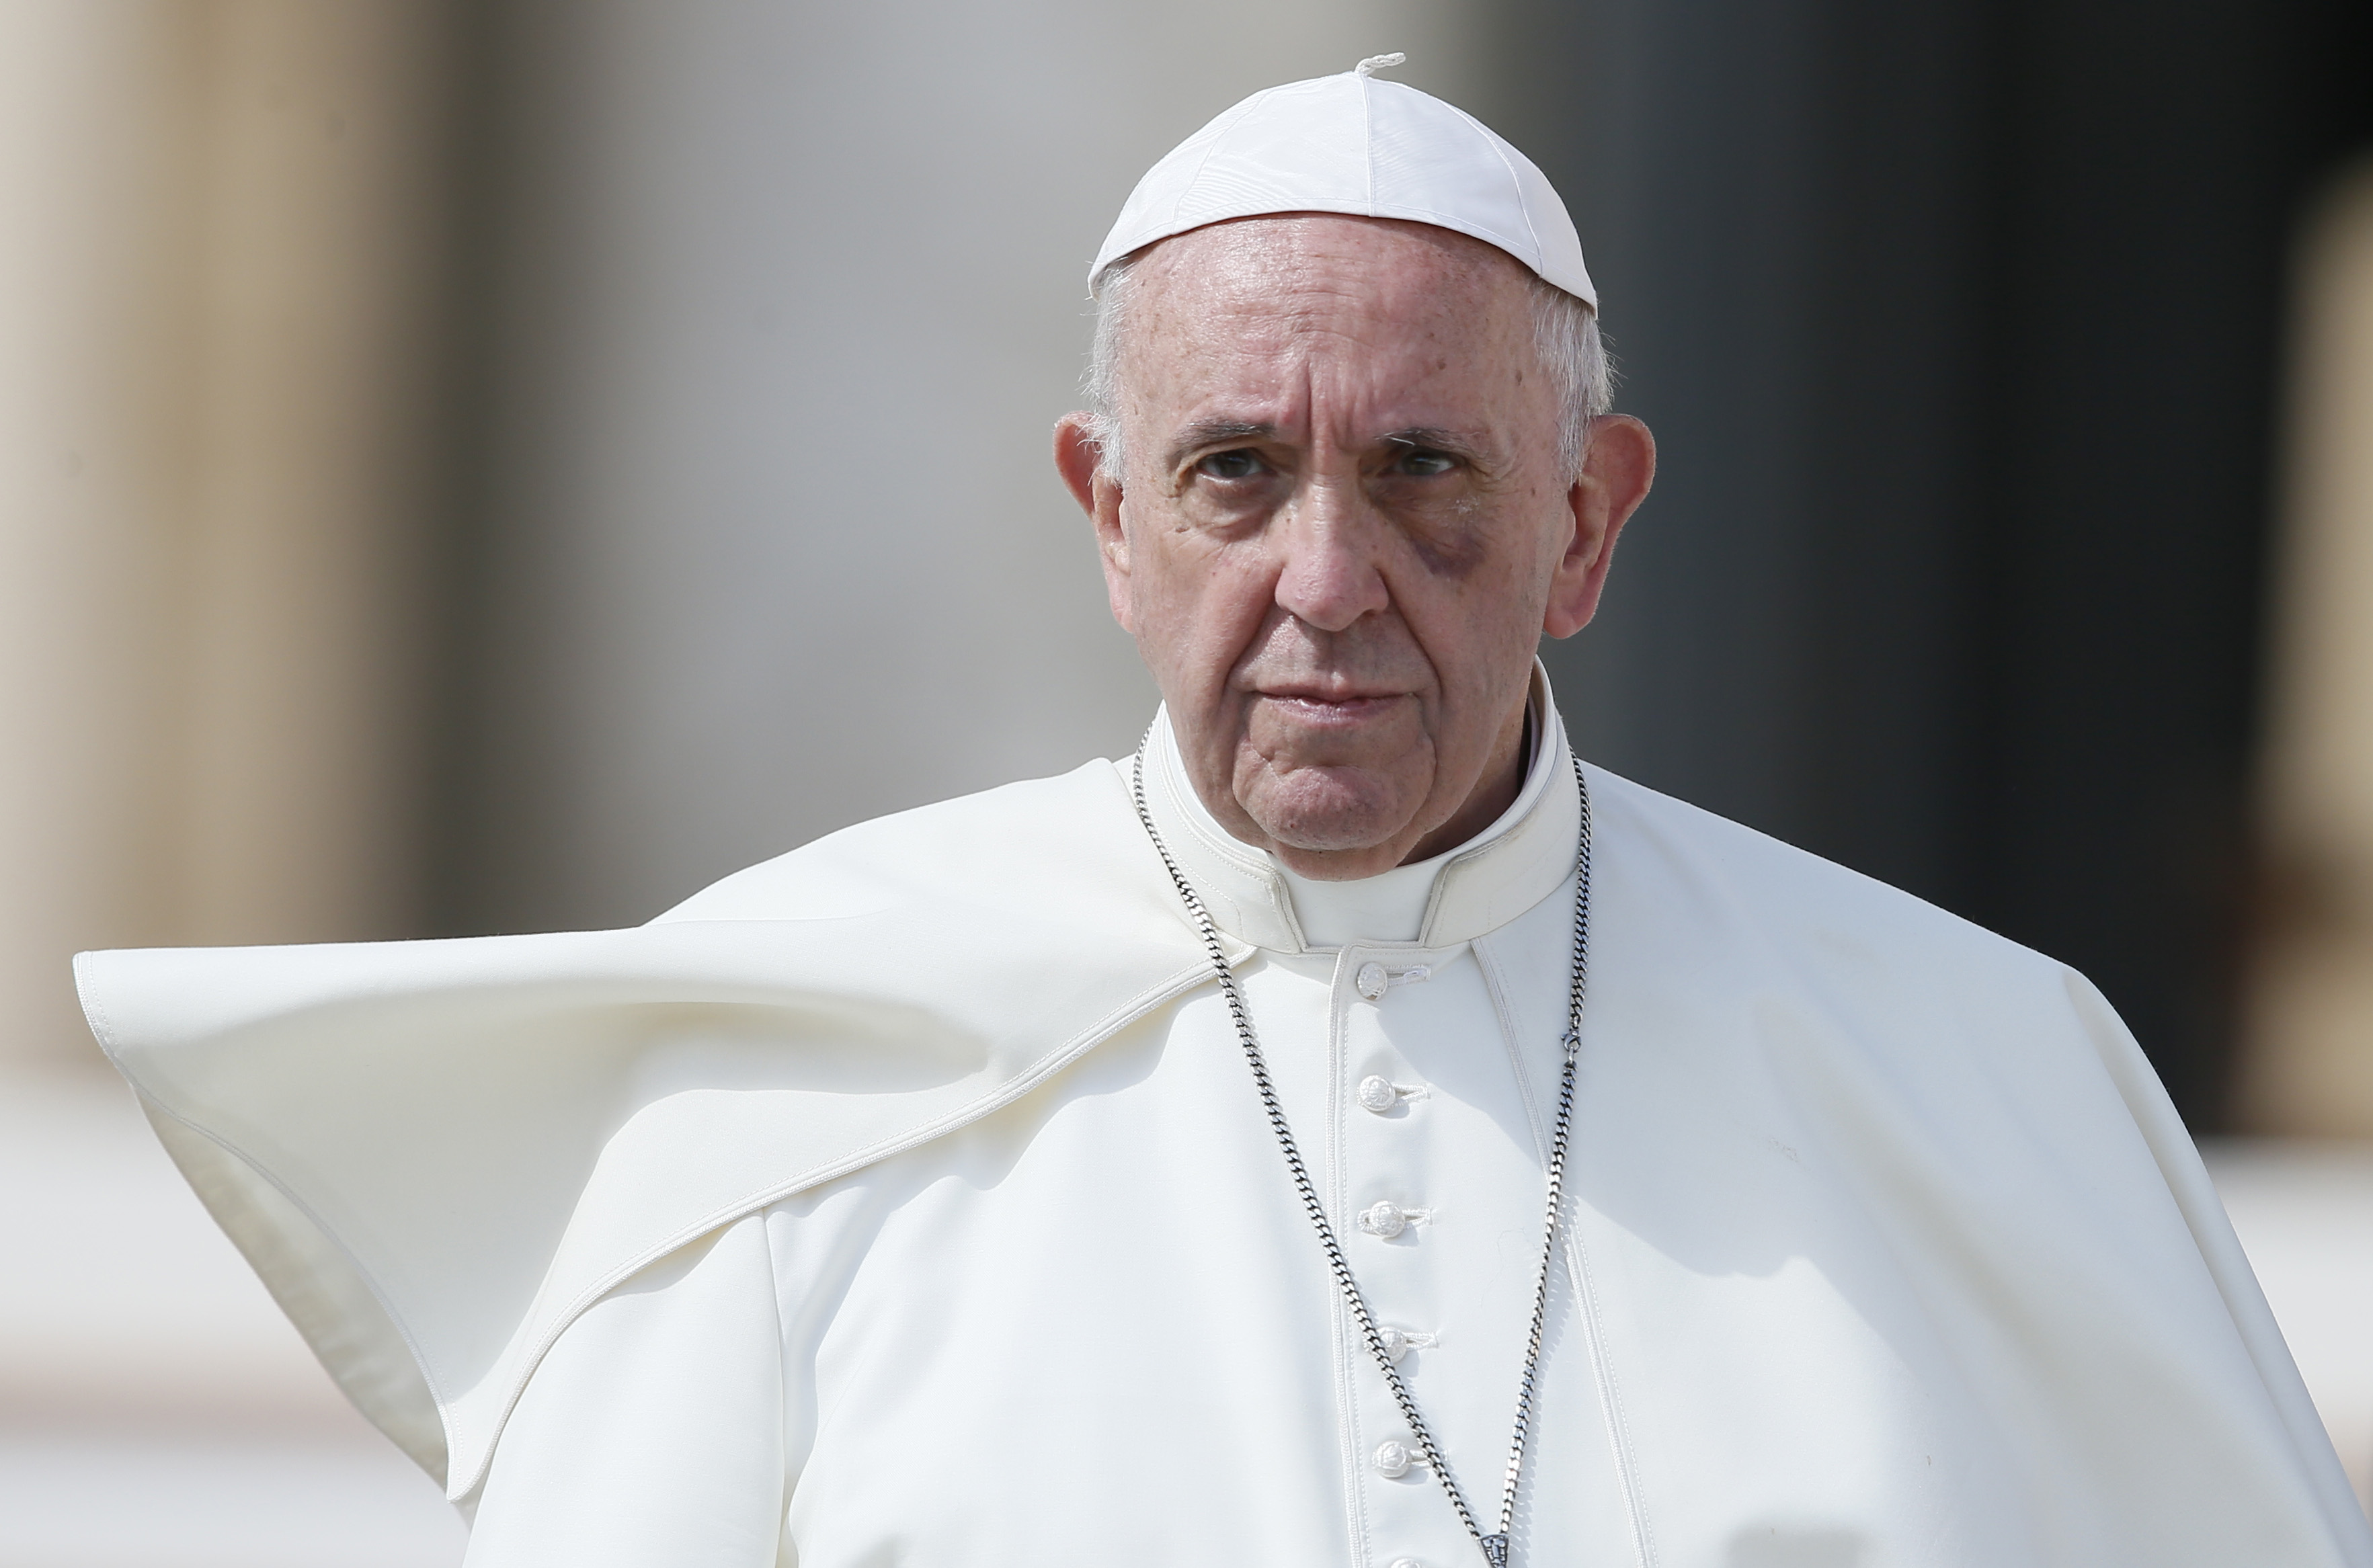 Pope Priests proven to have abused minors appeal | America Magazine